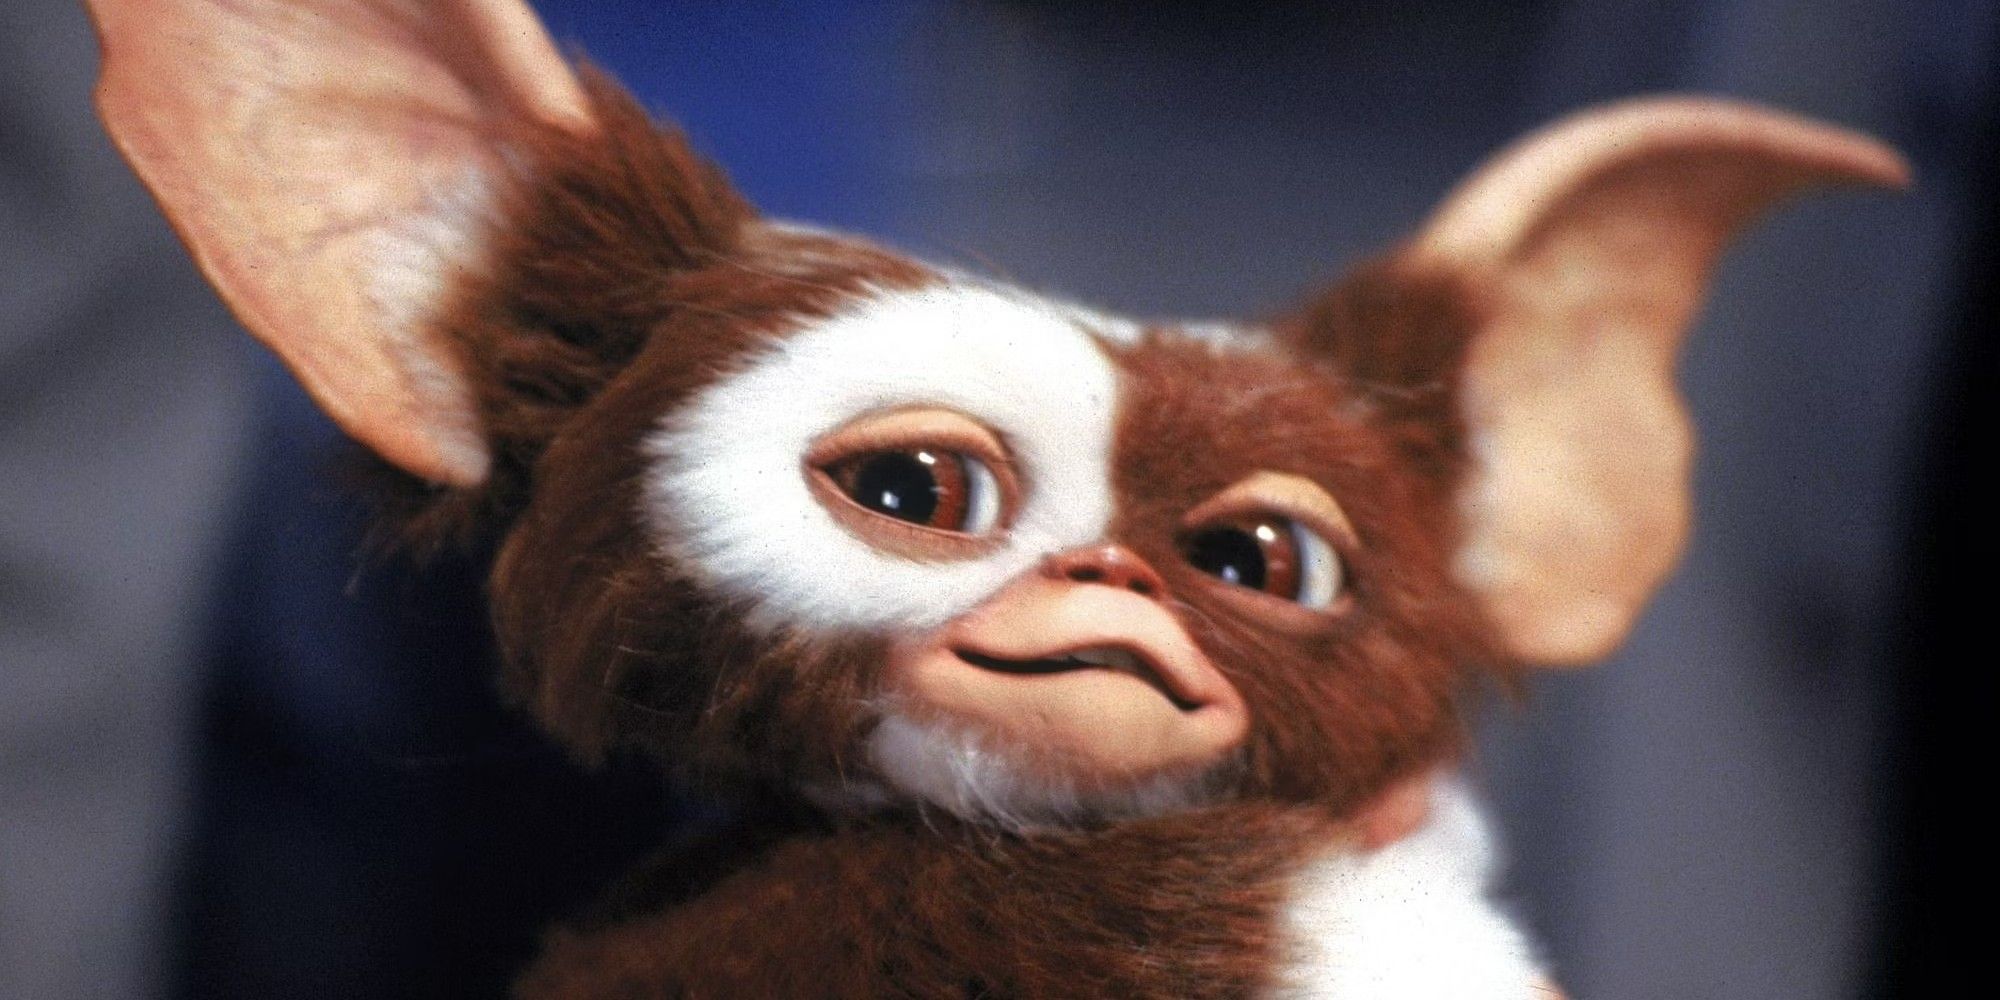 Gizmo, a Mogwai in the Gremlins franchise